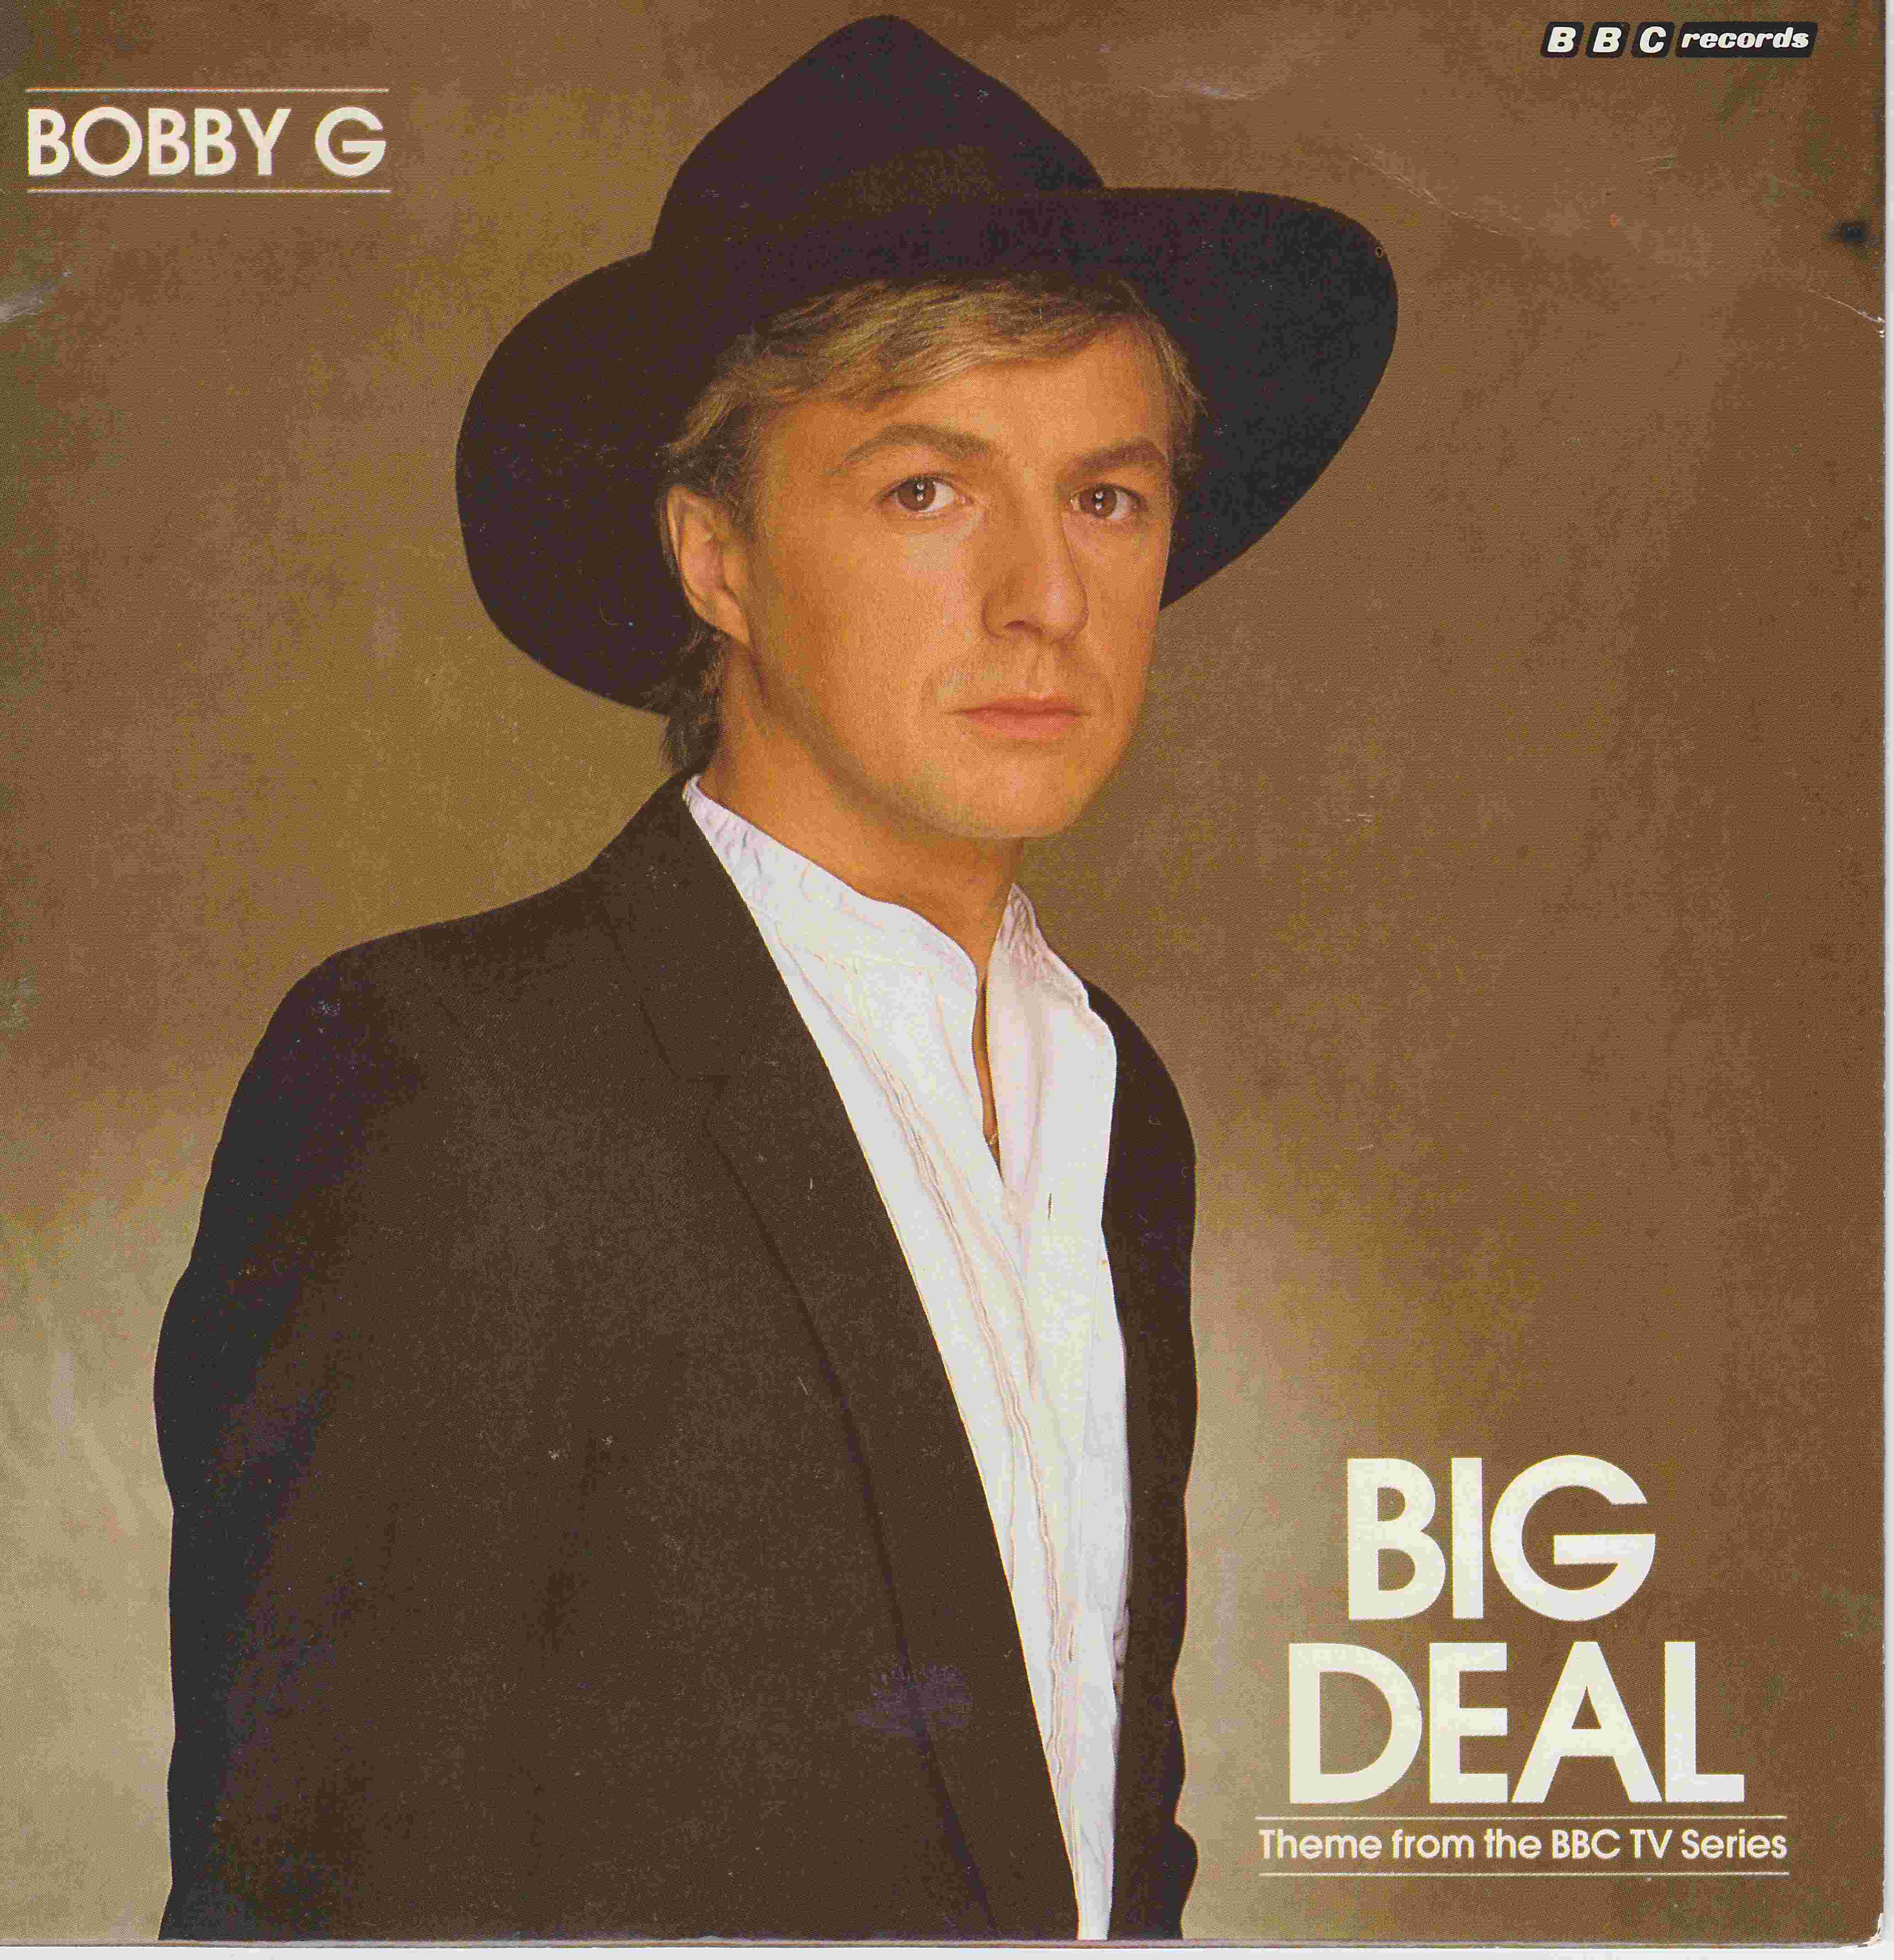 Picture of RESL 151 Big deal by artist Bobby G from the BBC records and Tapes library